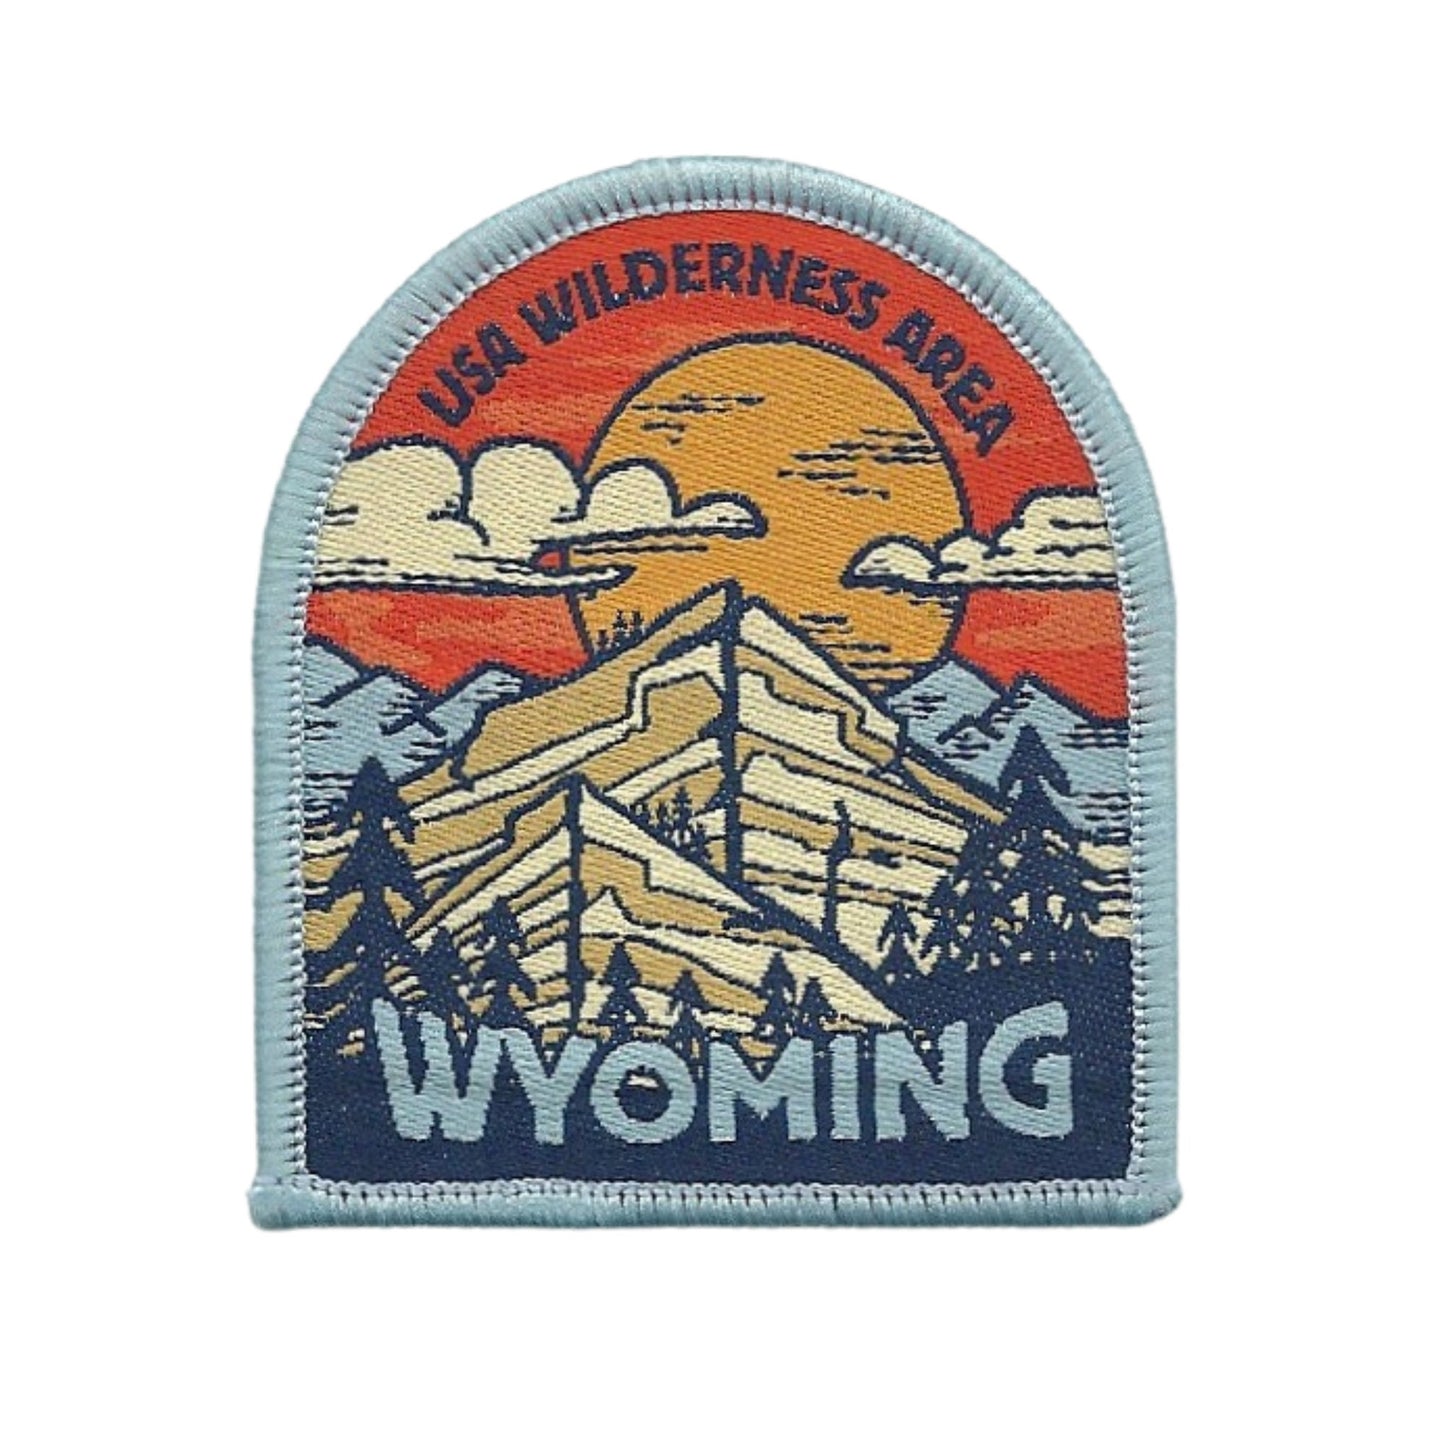 Wyoming Patch – WY USA Wilderness Area - Travel Patch – Souvenir Patch 2.5" Iron On Sew On Embellishment Applique